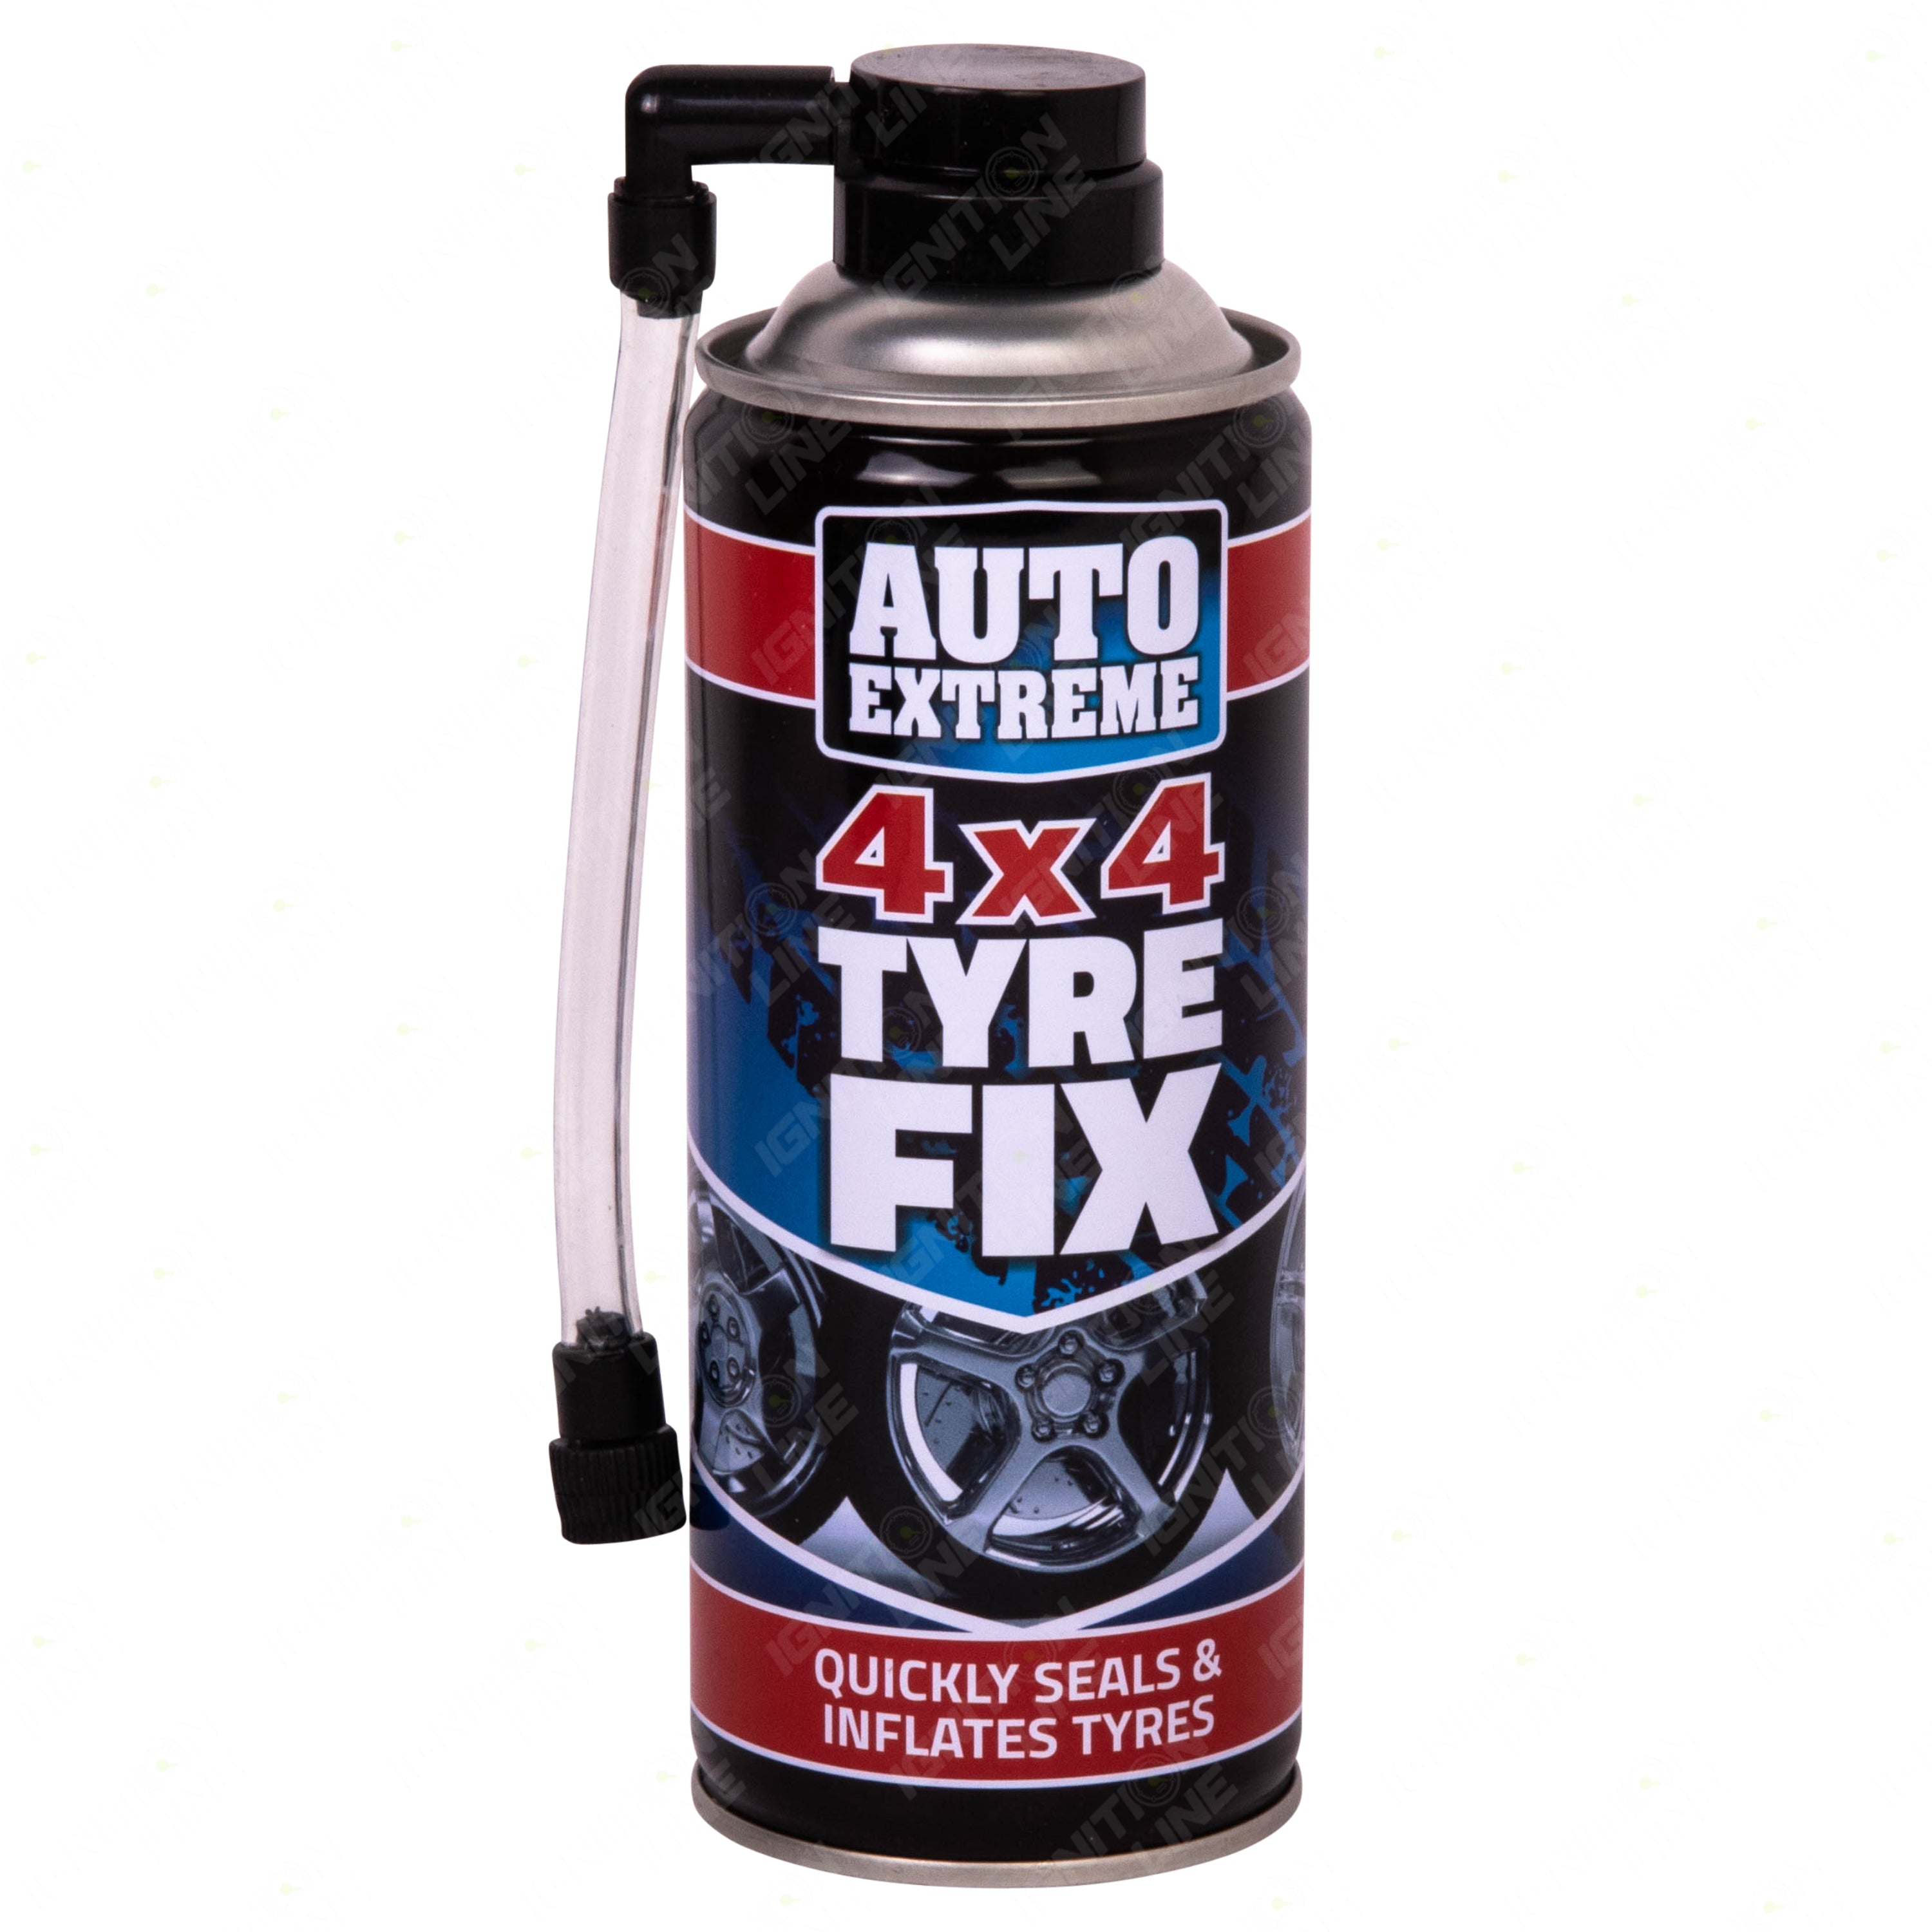 Auto Extreme Emergency 4x4 Off Road Car Tyre Puncture Fix Repair Large 450ml